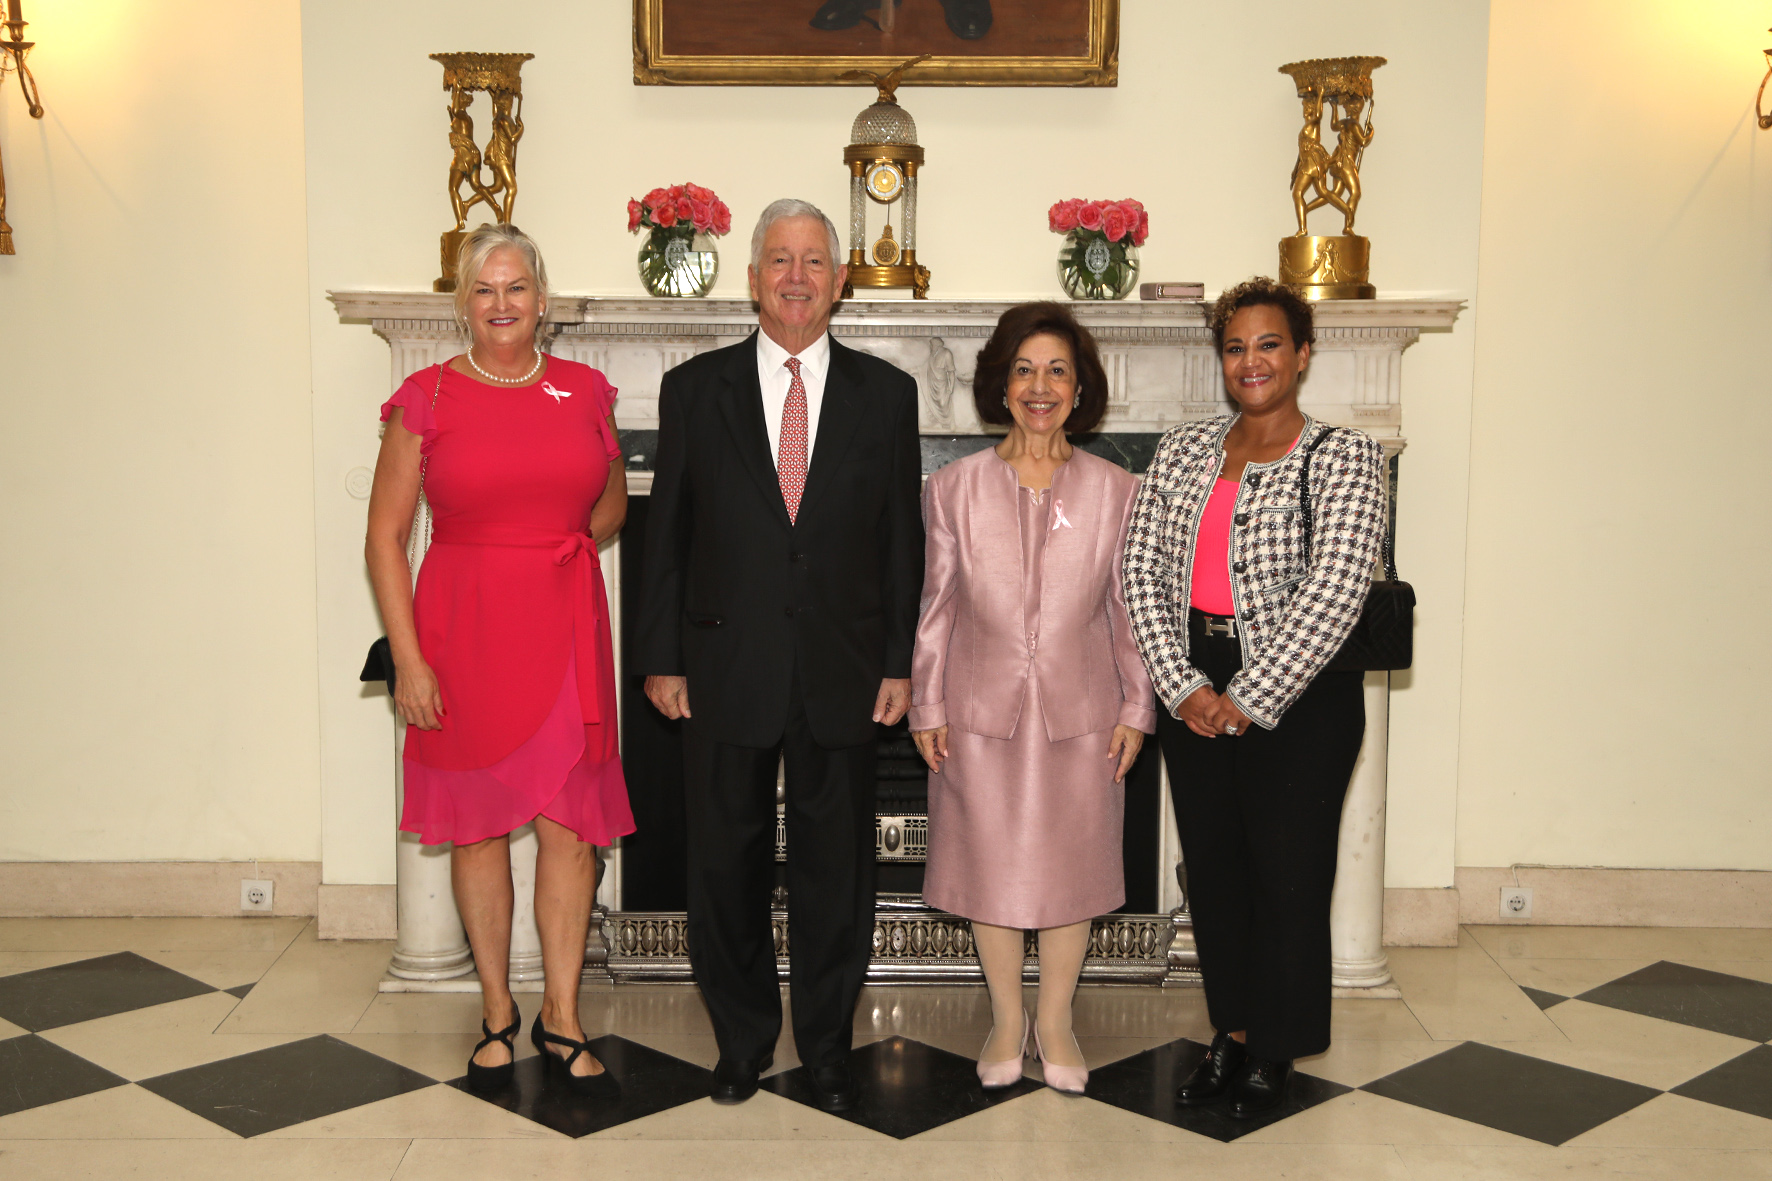 TRH Crown Prince Alexander and Crown Princess Katherine with Mrs. Julie Hill, wife of the Ambassador of USA, and representative of USAID